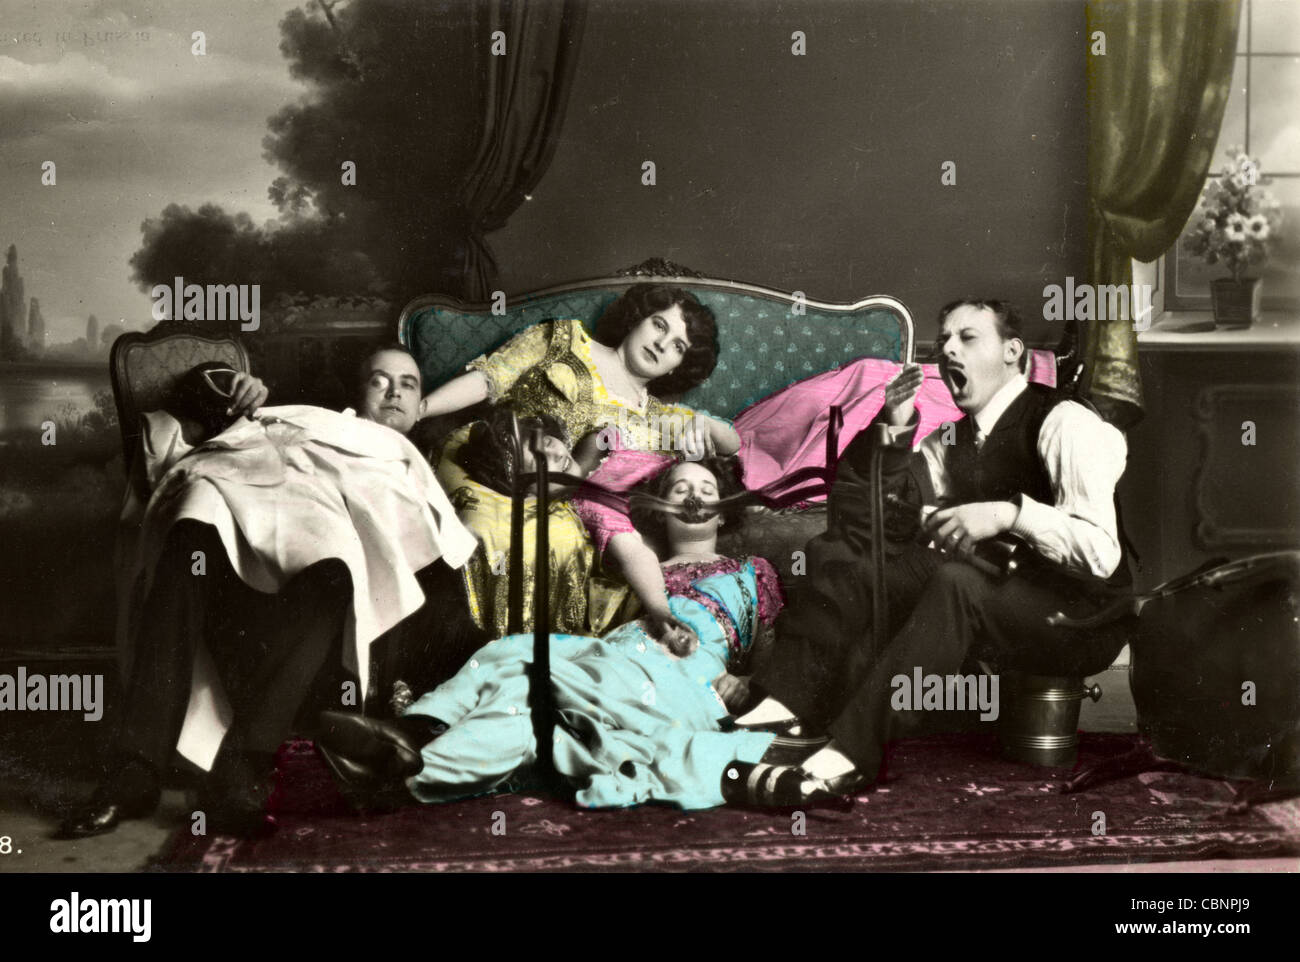 Five Tired & Exhaused Partygoers Stock Photo